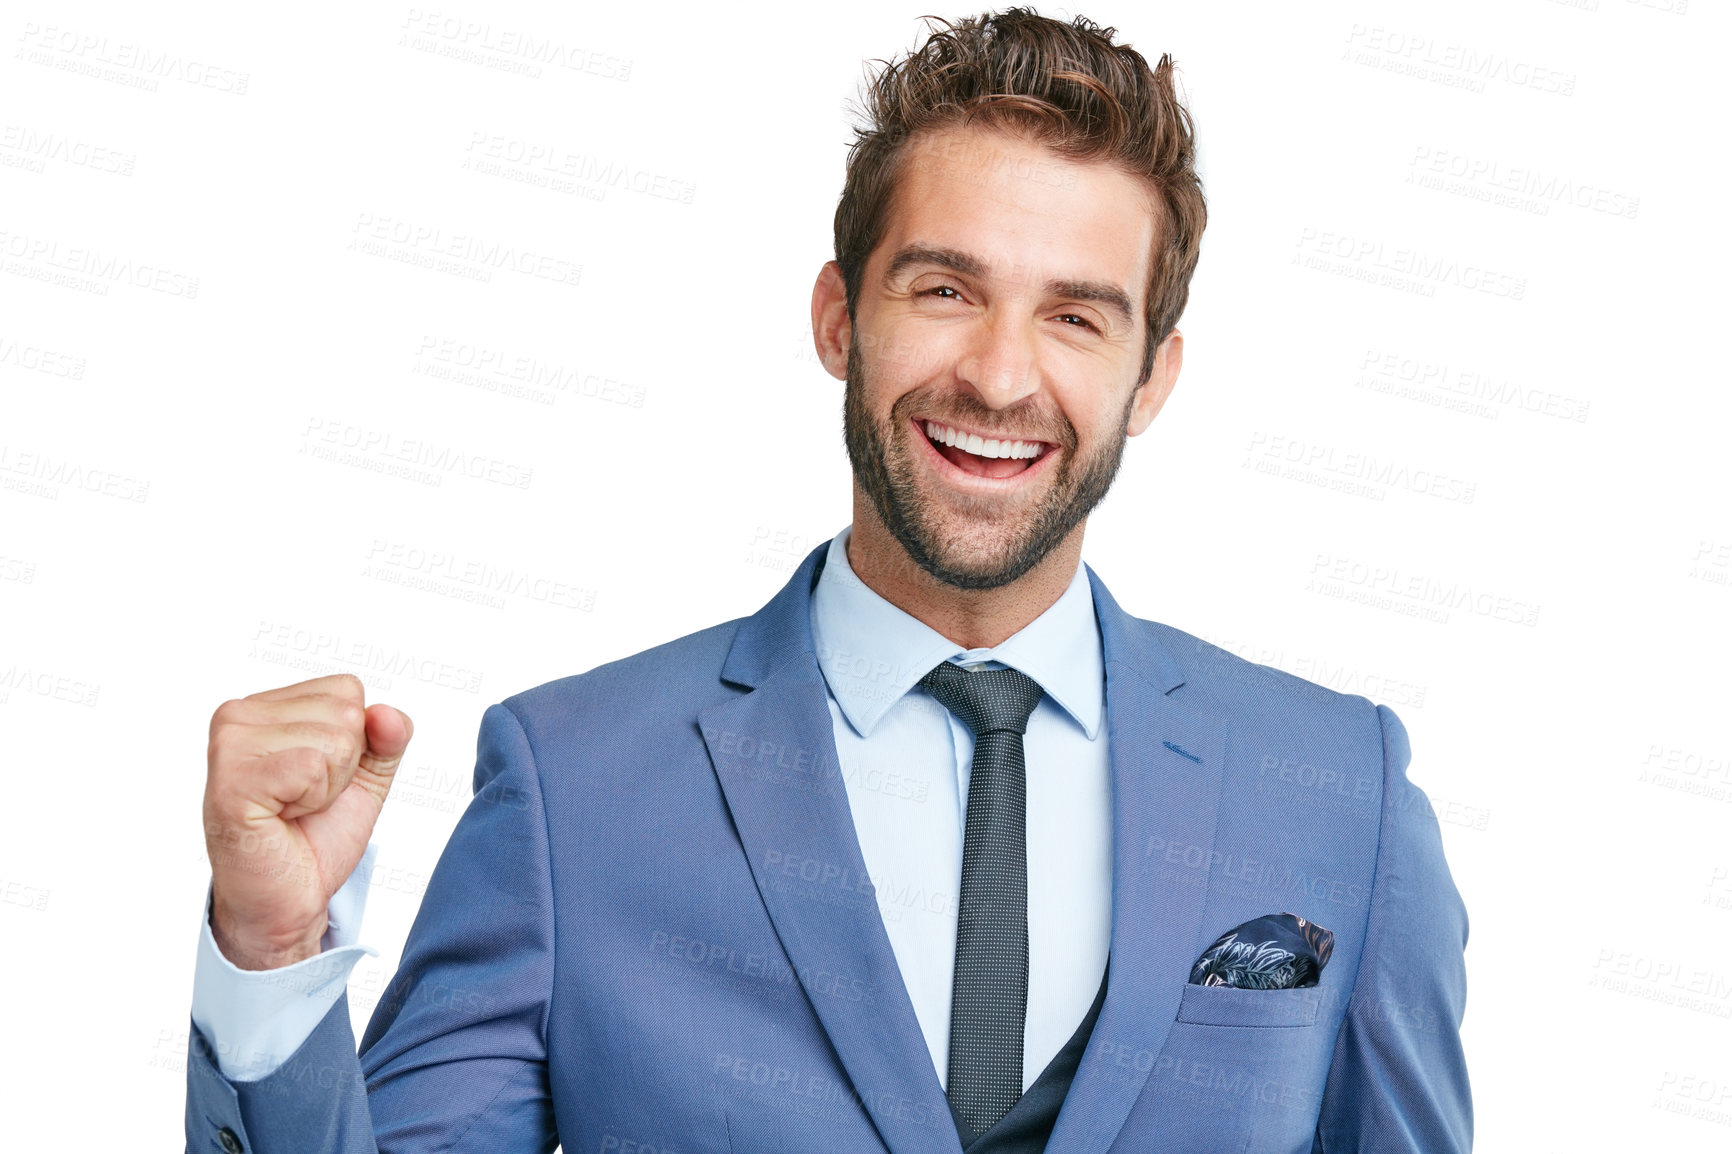 Buy stock photo Studio shot of a happy businessman celebrating success against a white background